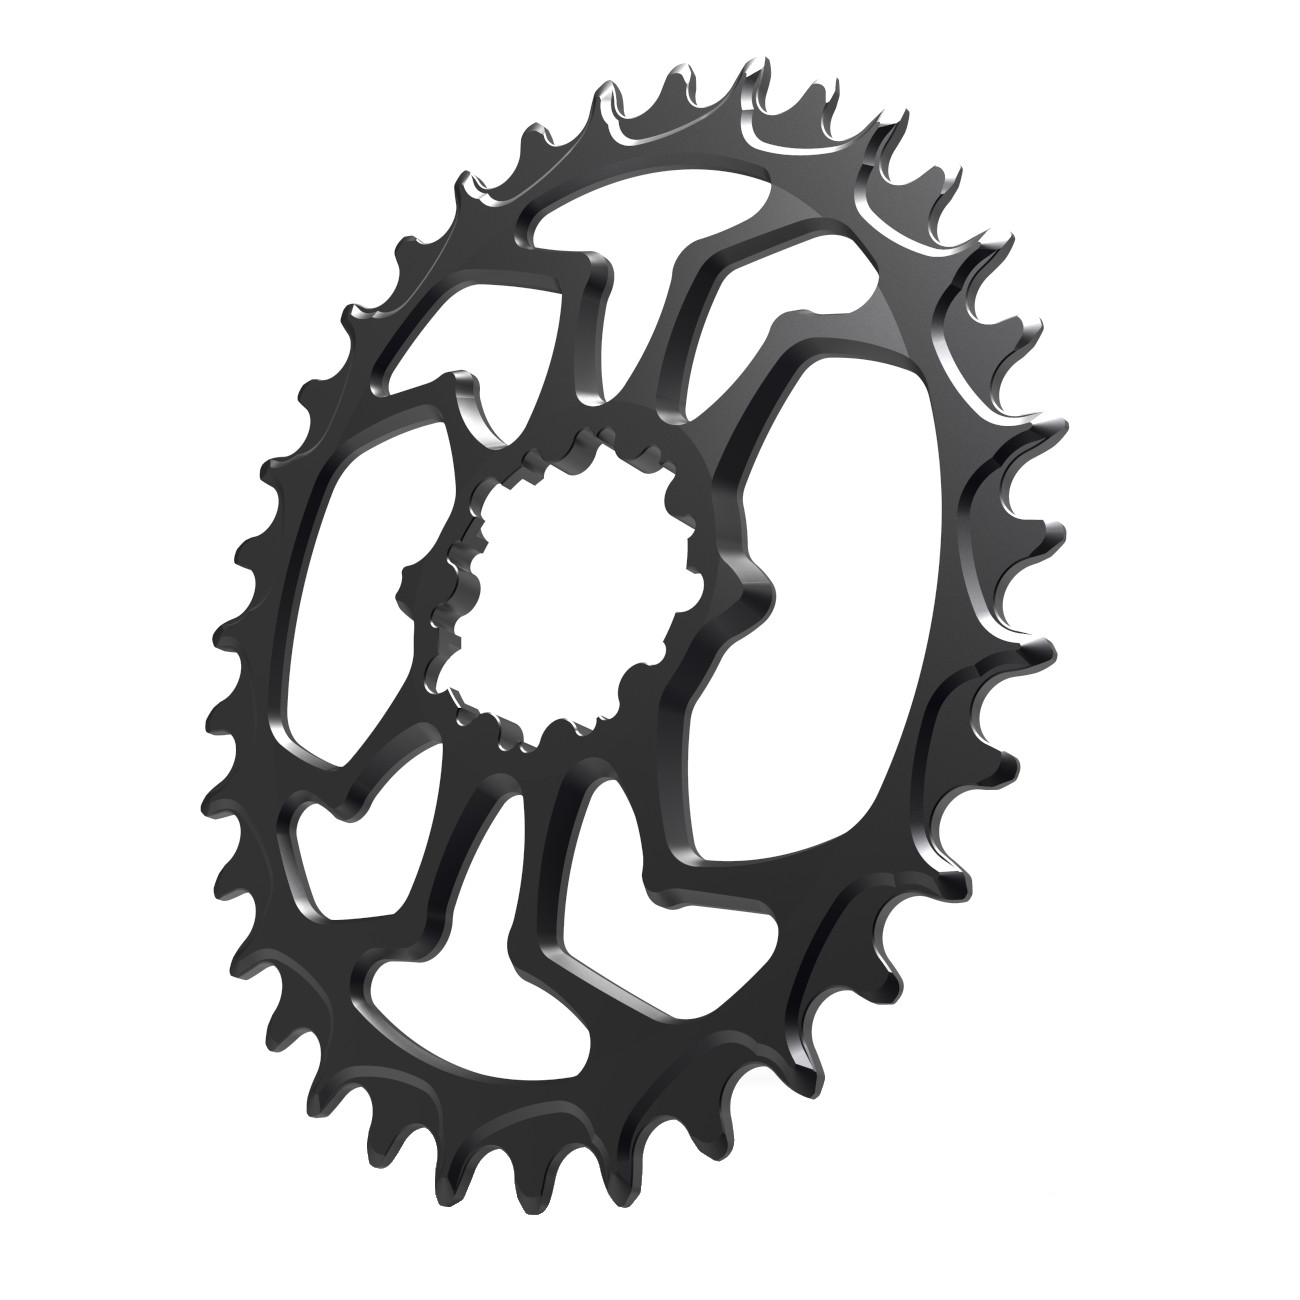 Image of Alugear Spider Narrow Wide SuperBoost Chainring - Oval - for 1x SRAM 3-Bolt Direct Mount